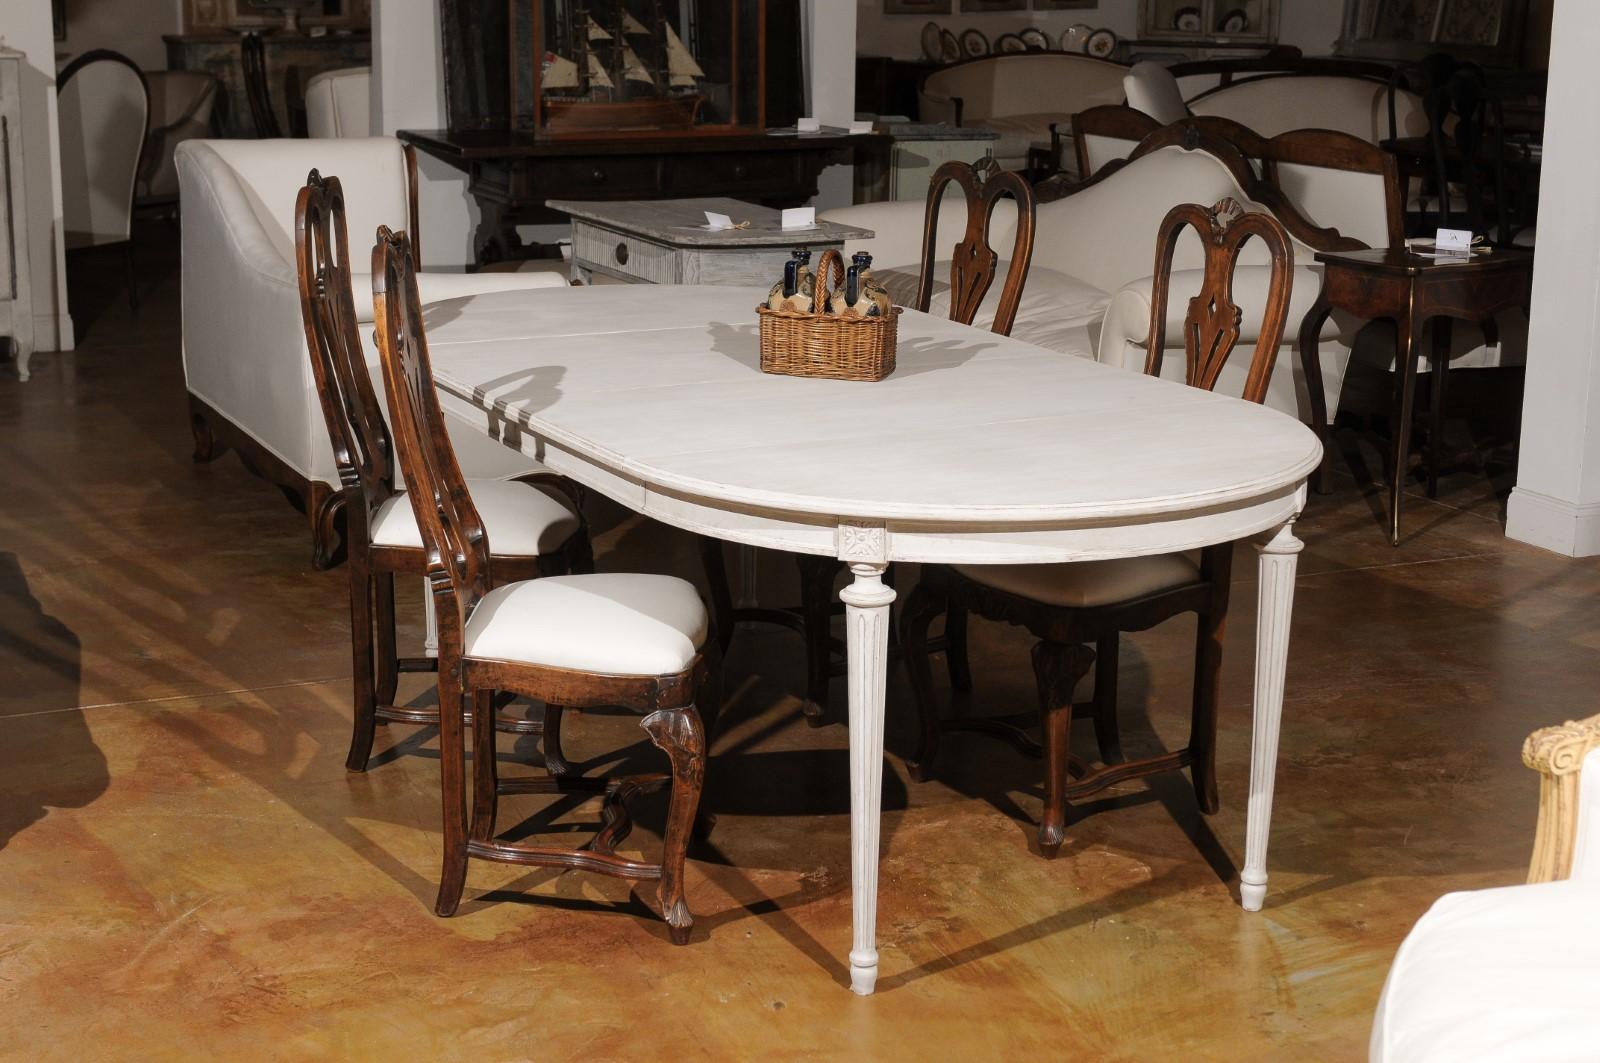 A Swedish neoclassical style painted wood oval extension dining table from the 19th century with two leaves and fluted legs. Born in Sweden during the 19th century, this dining table features an elegant top that opens up to receive two additional